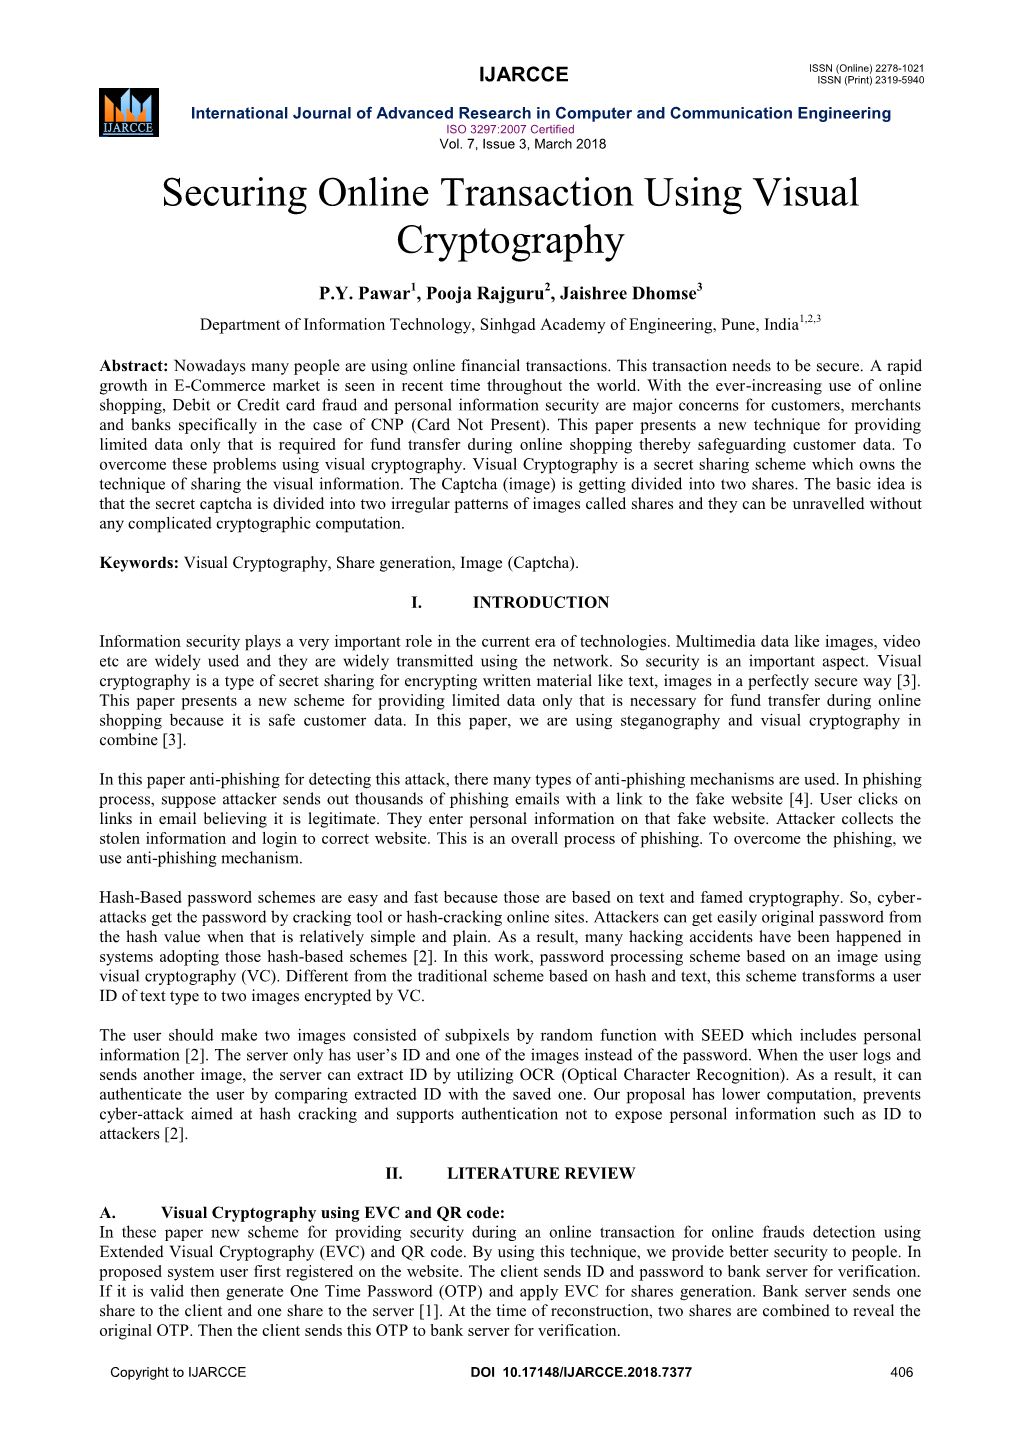 Securing Online Transaction Using Visual Cryptography